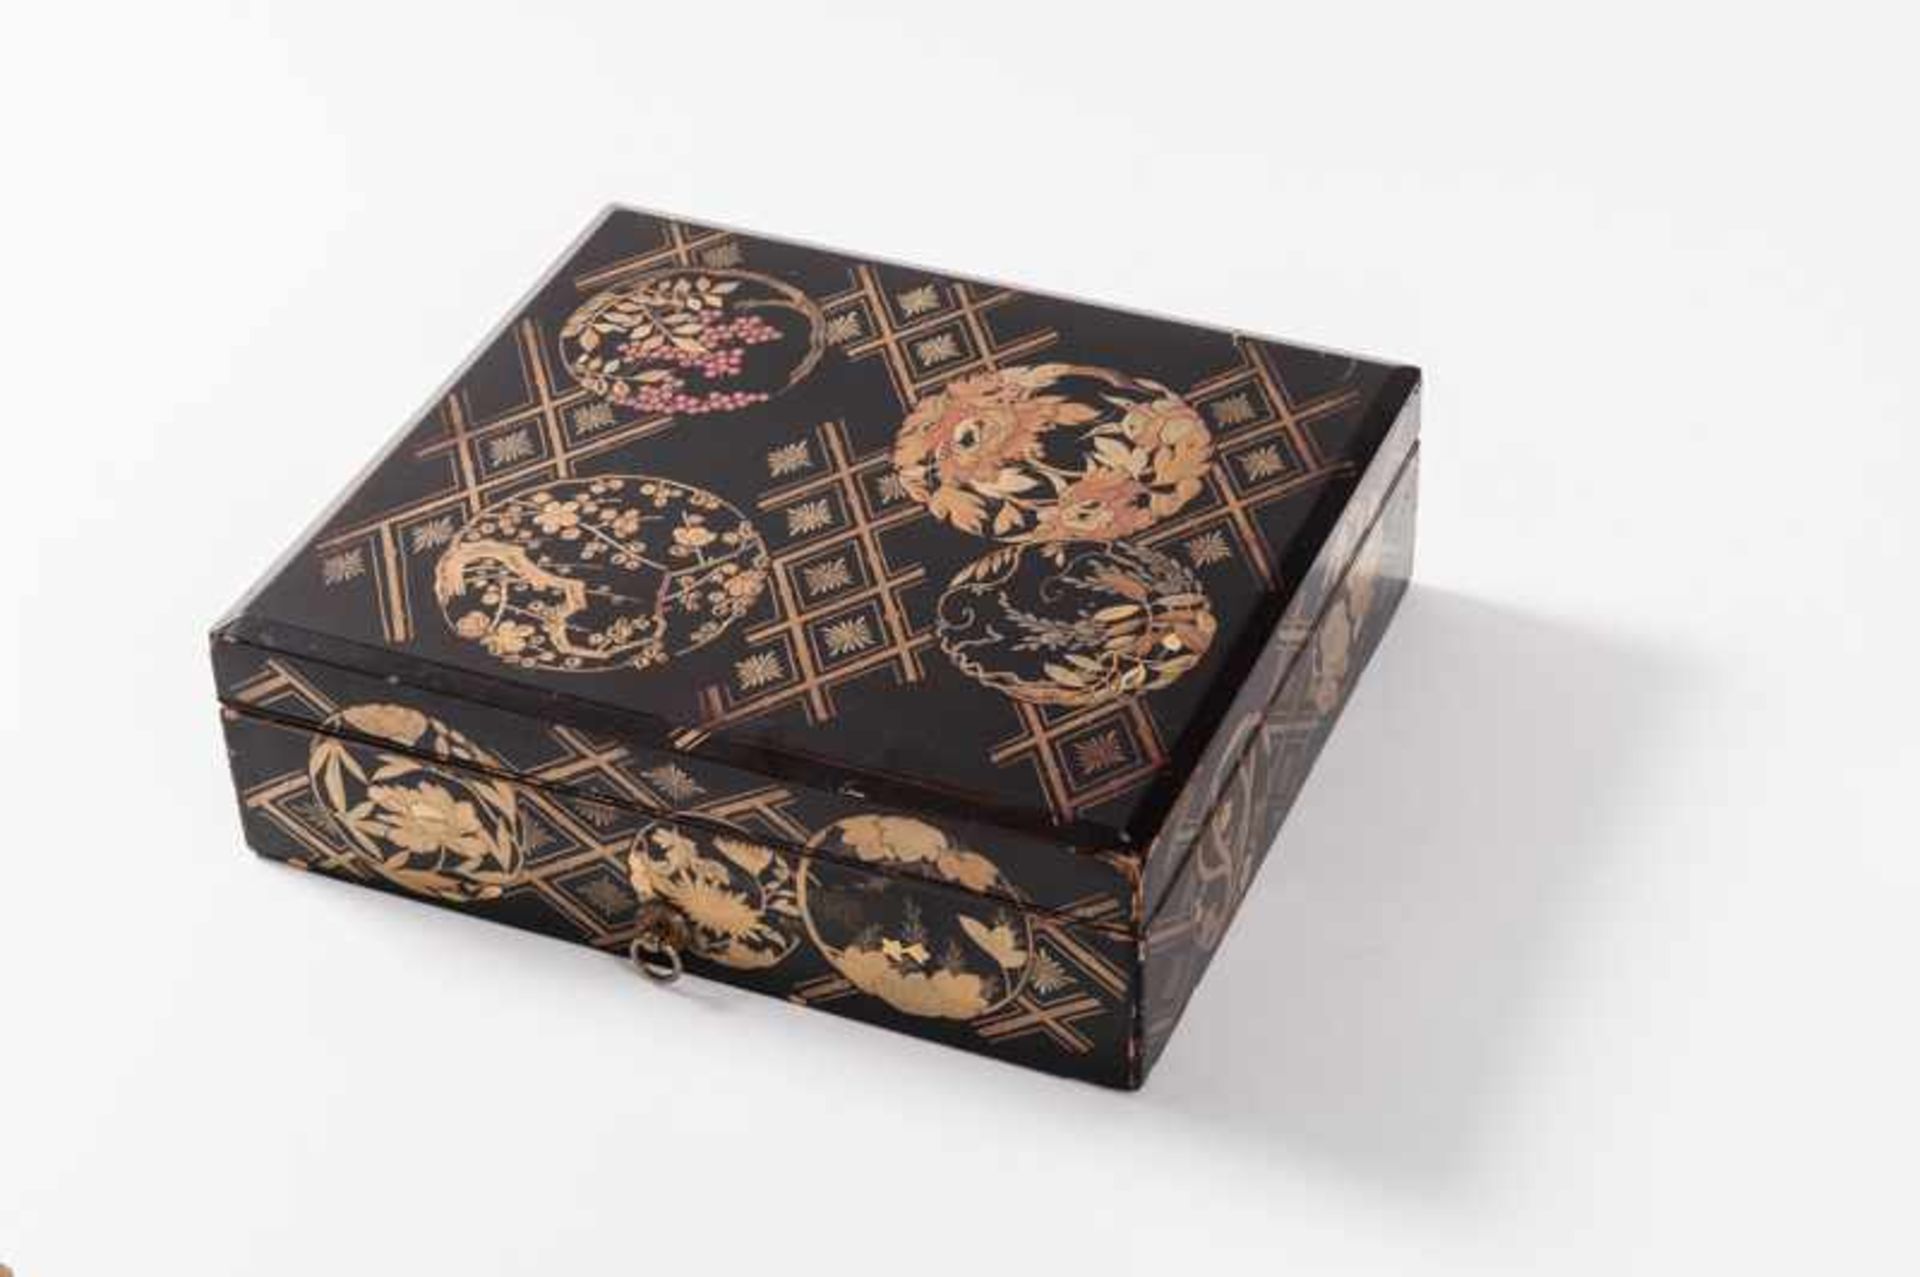 A LARGE DECORATIVE URUSHI LACQUER BOX WITH GOLD Wood, urushi lacquer. Japan, 19th cent.Condition